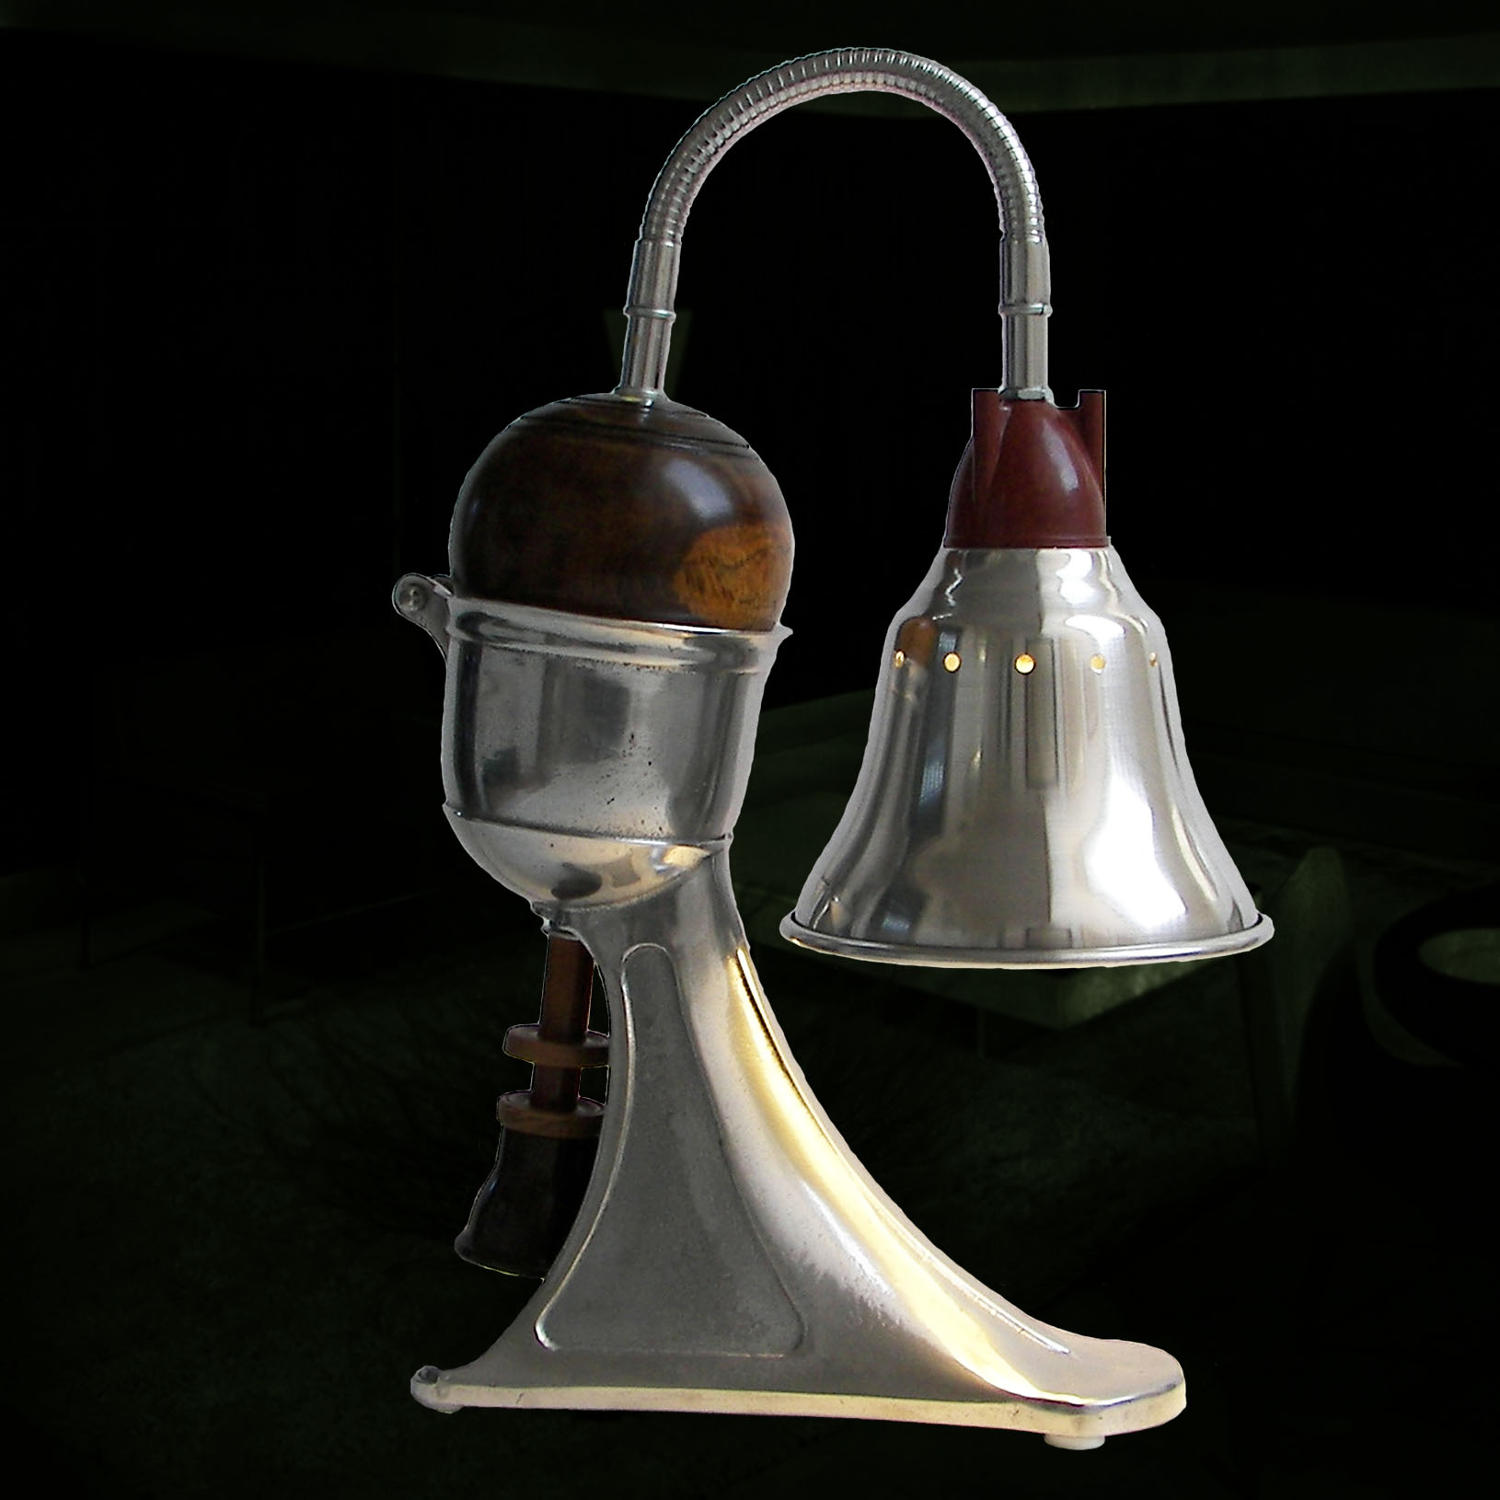 Collectible unique lamp - Nuance - by Gilles Bourlet Dartmouth